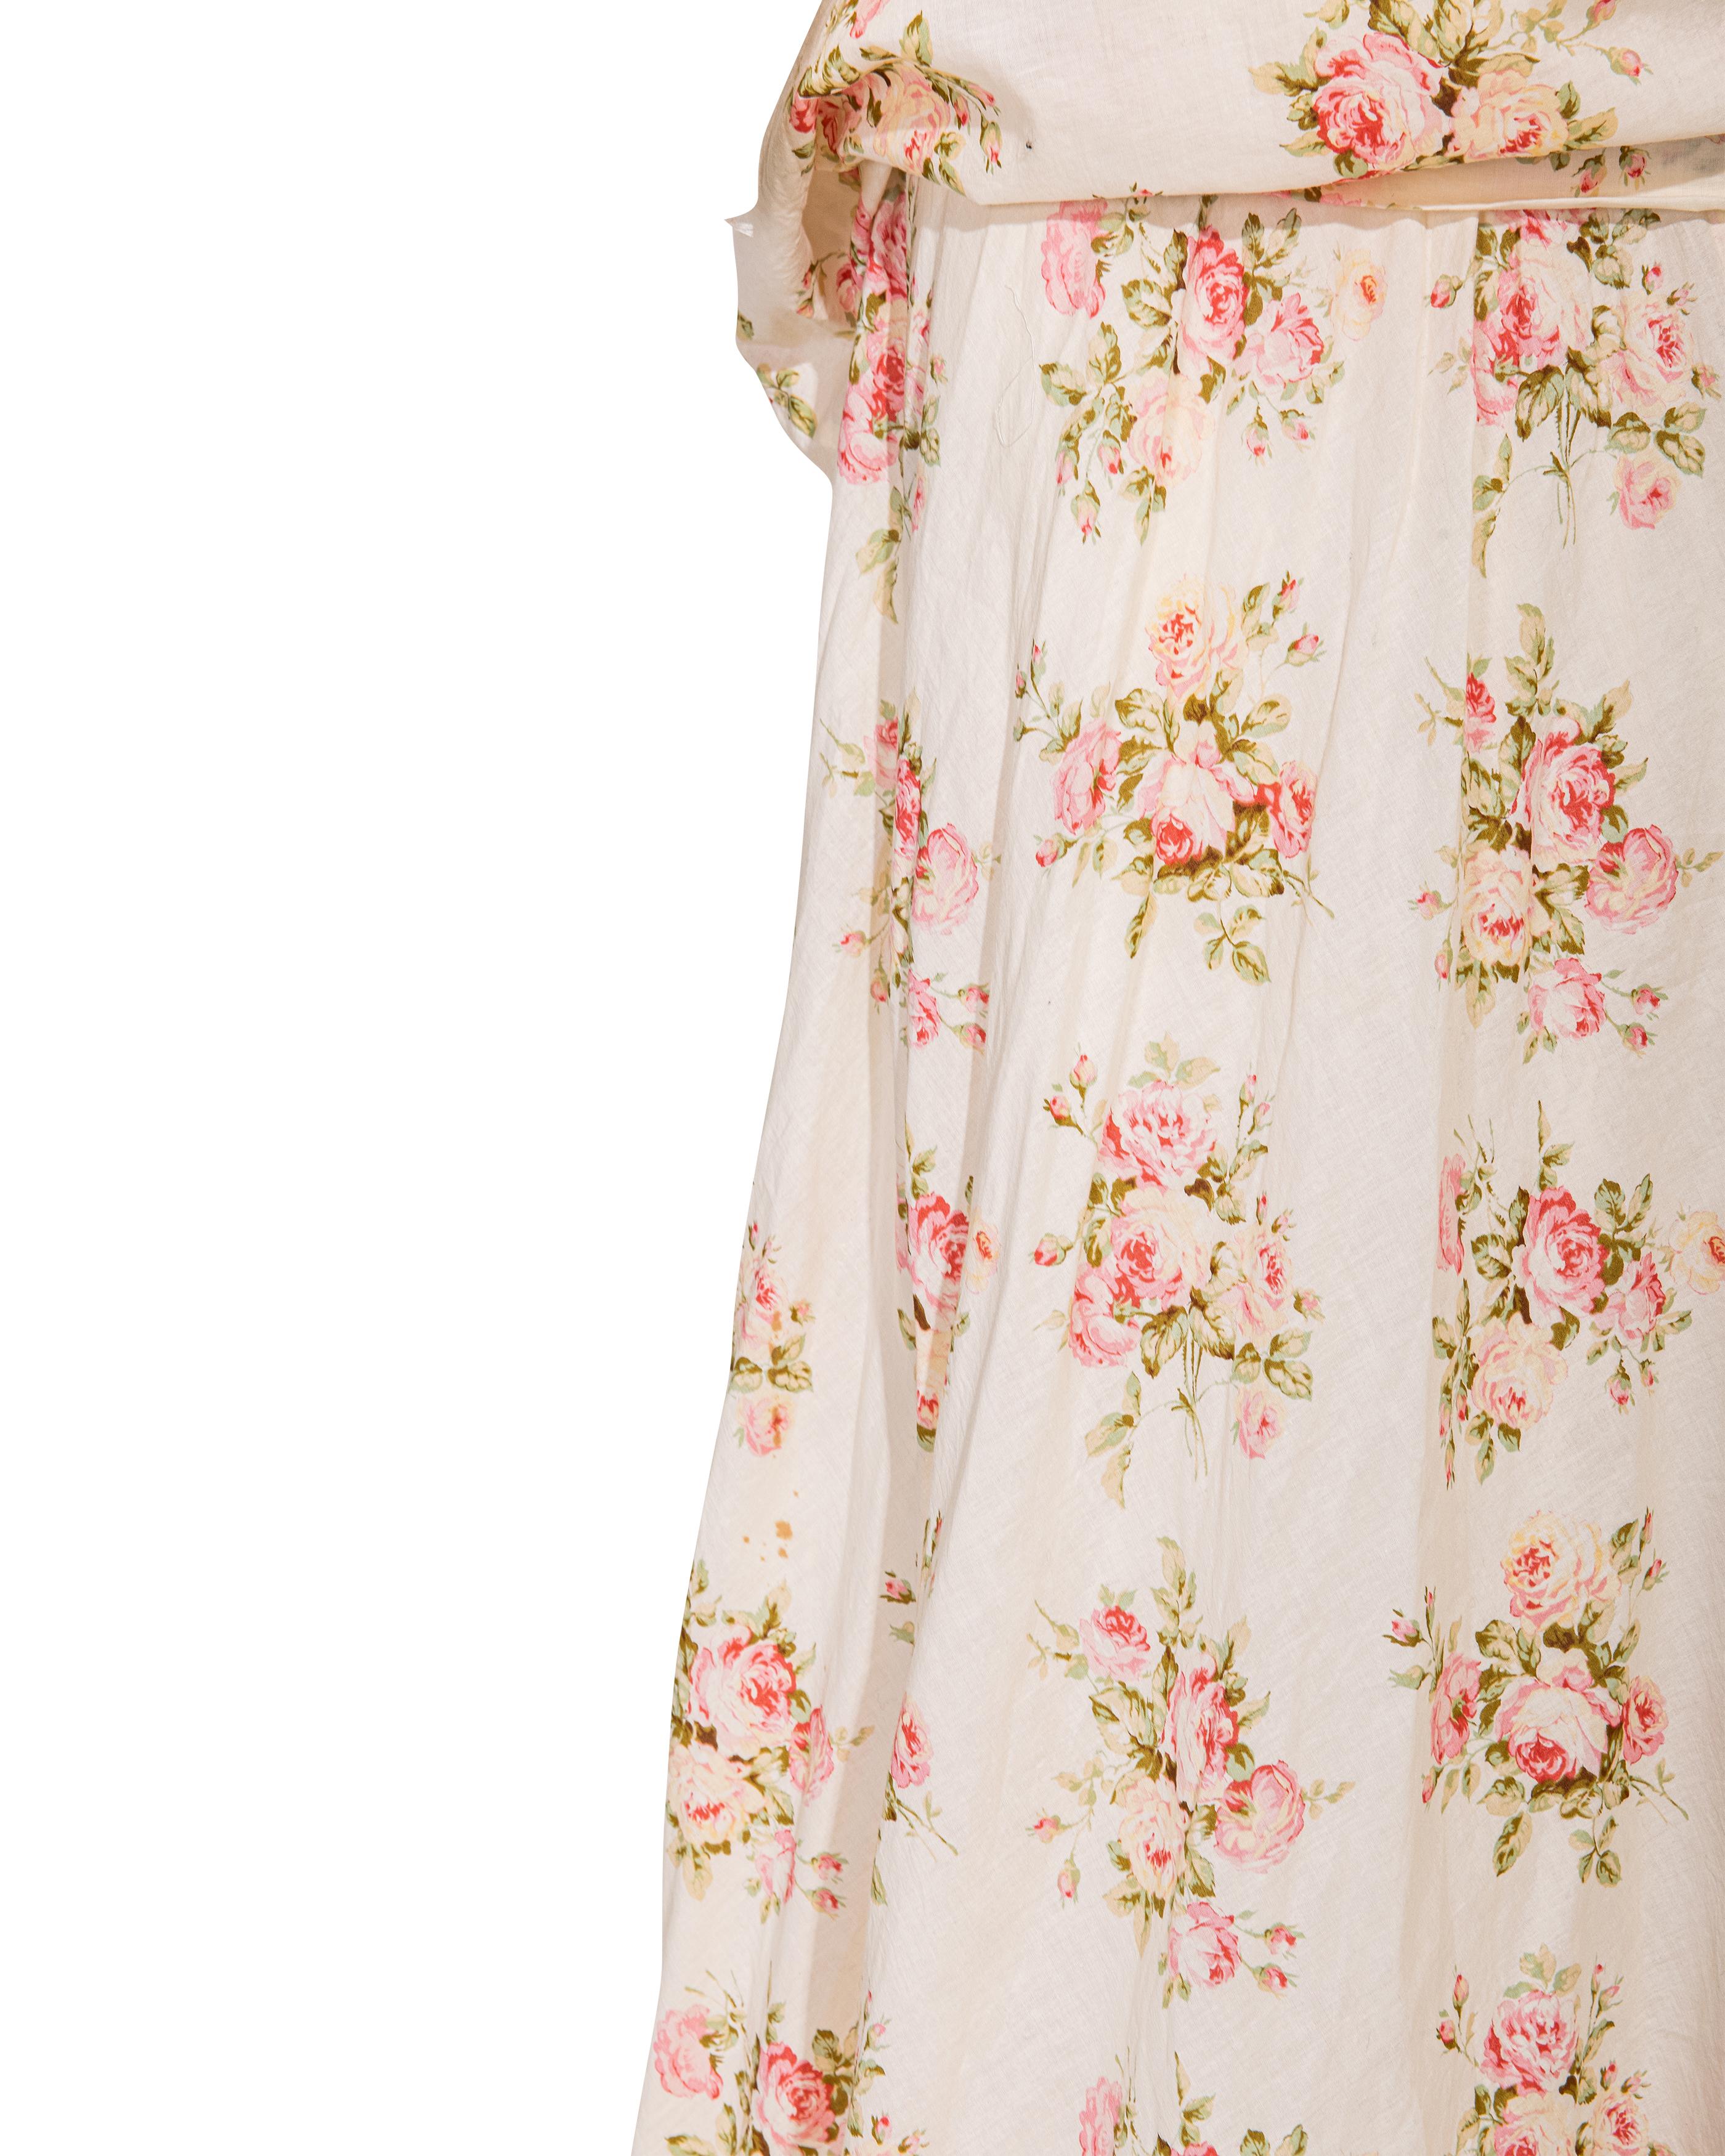 S/S 2008 Junya Watanabe Ecru Cotton Dress with Pink Floral Pattern For Sale 4